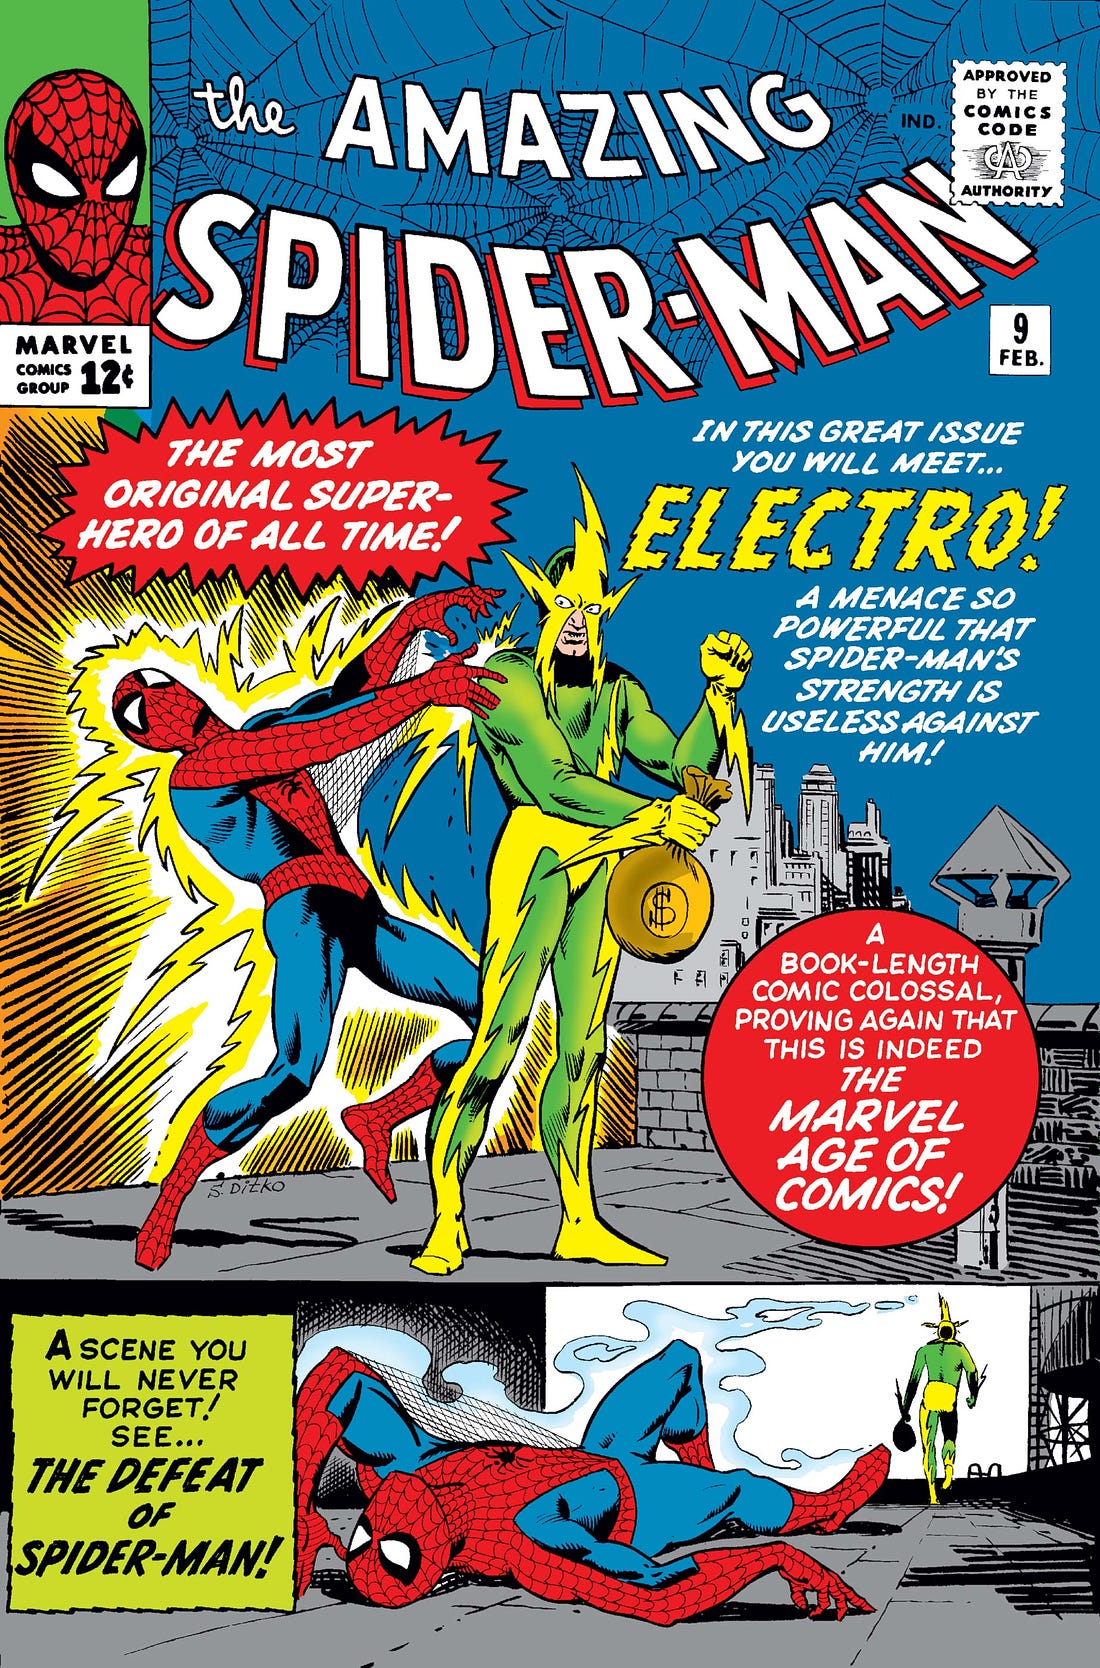 The Amazing Spider-Man (1963) #9 | Comic Issues | Marvel